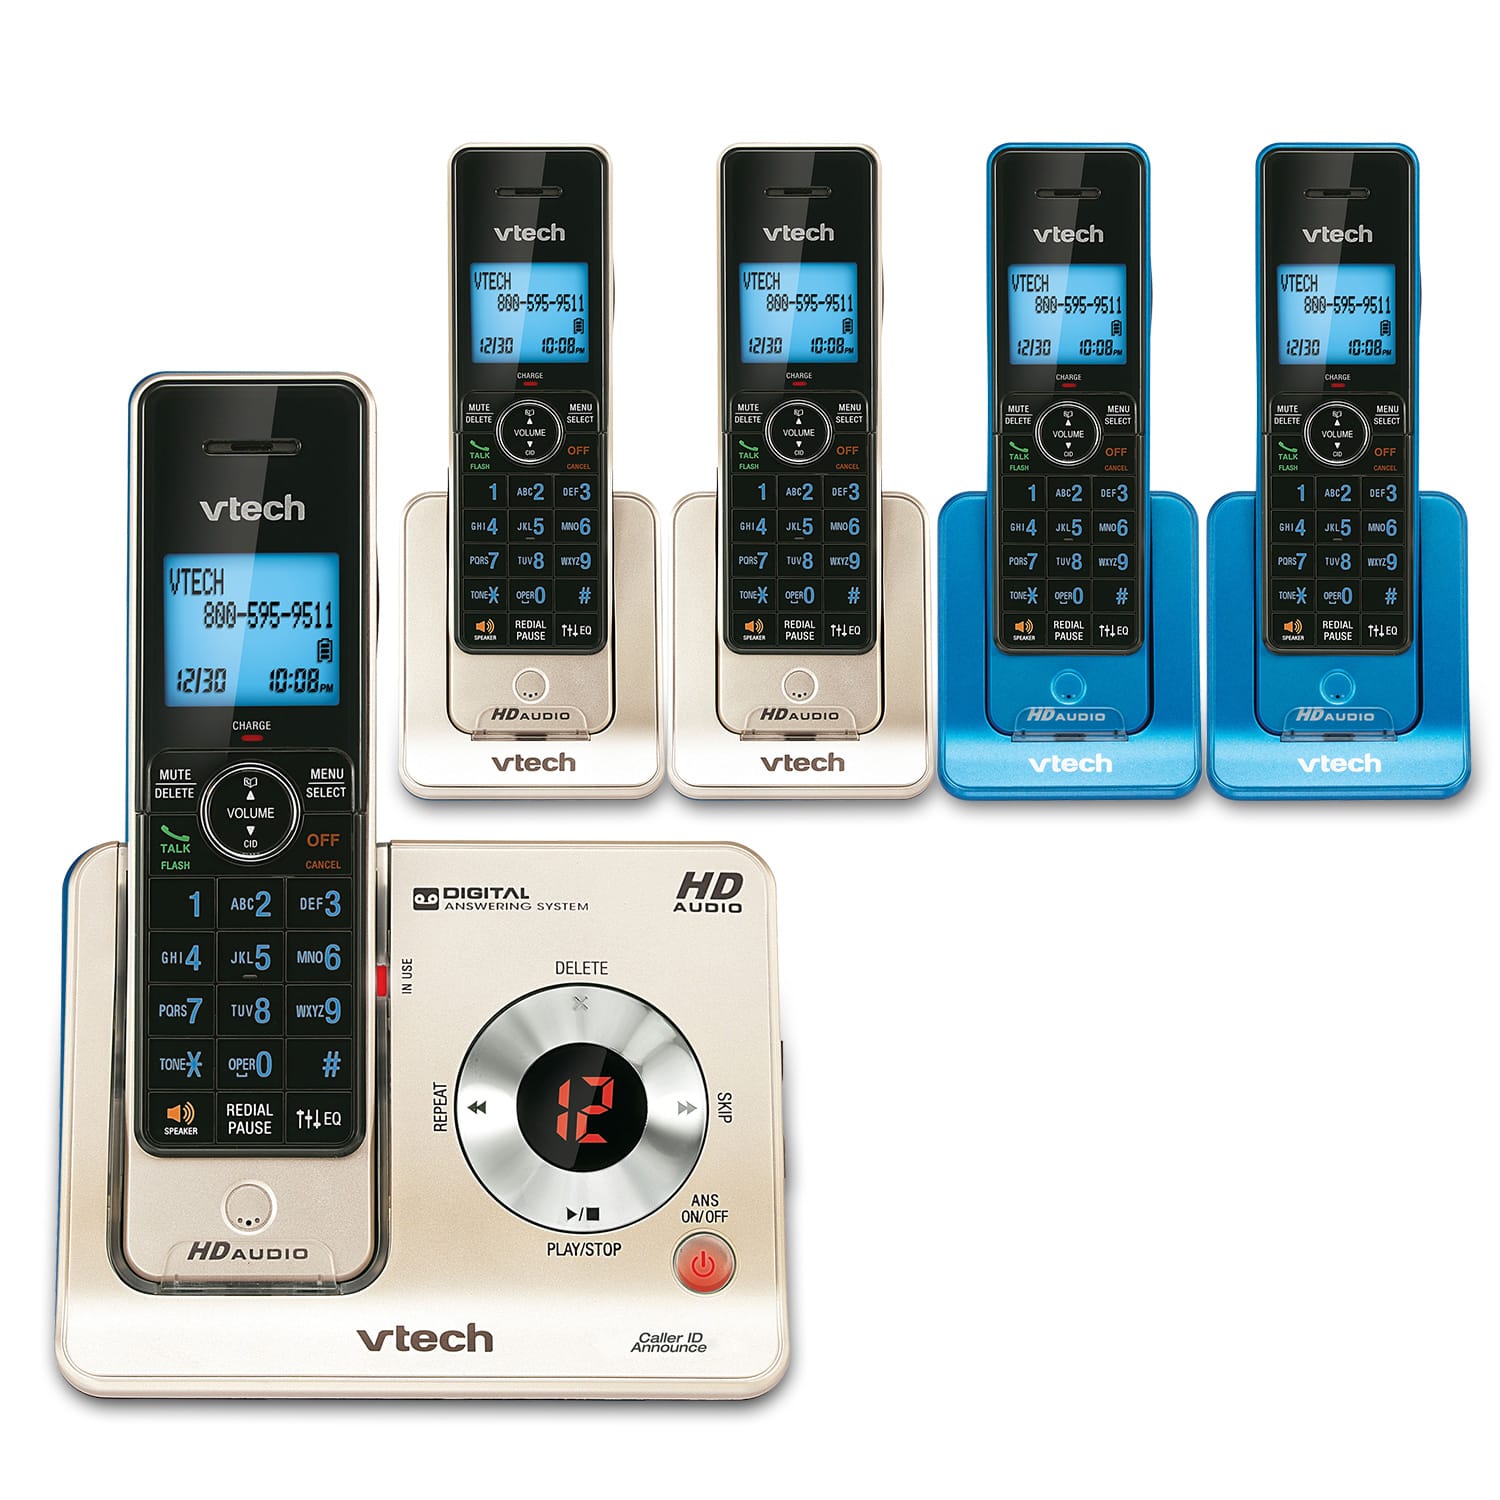 5 Handset Phone System with Caller ID/Call Waiting - view 1